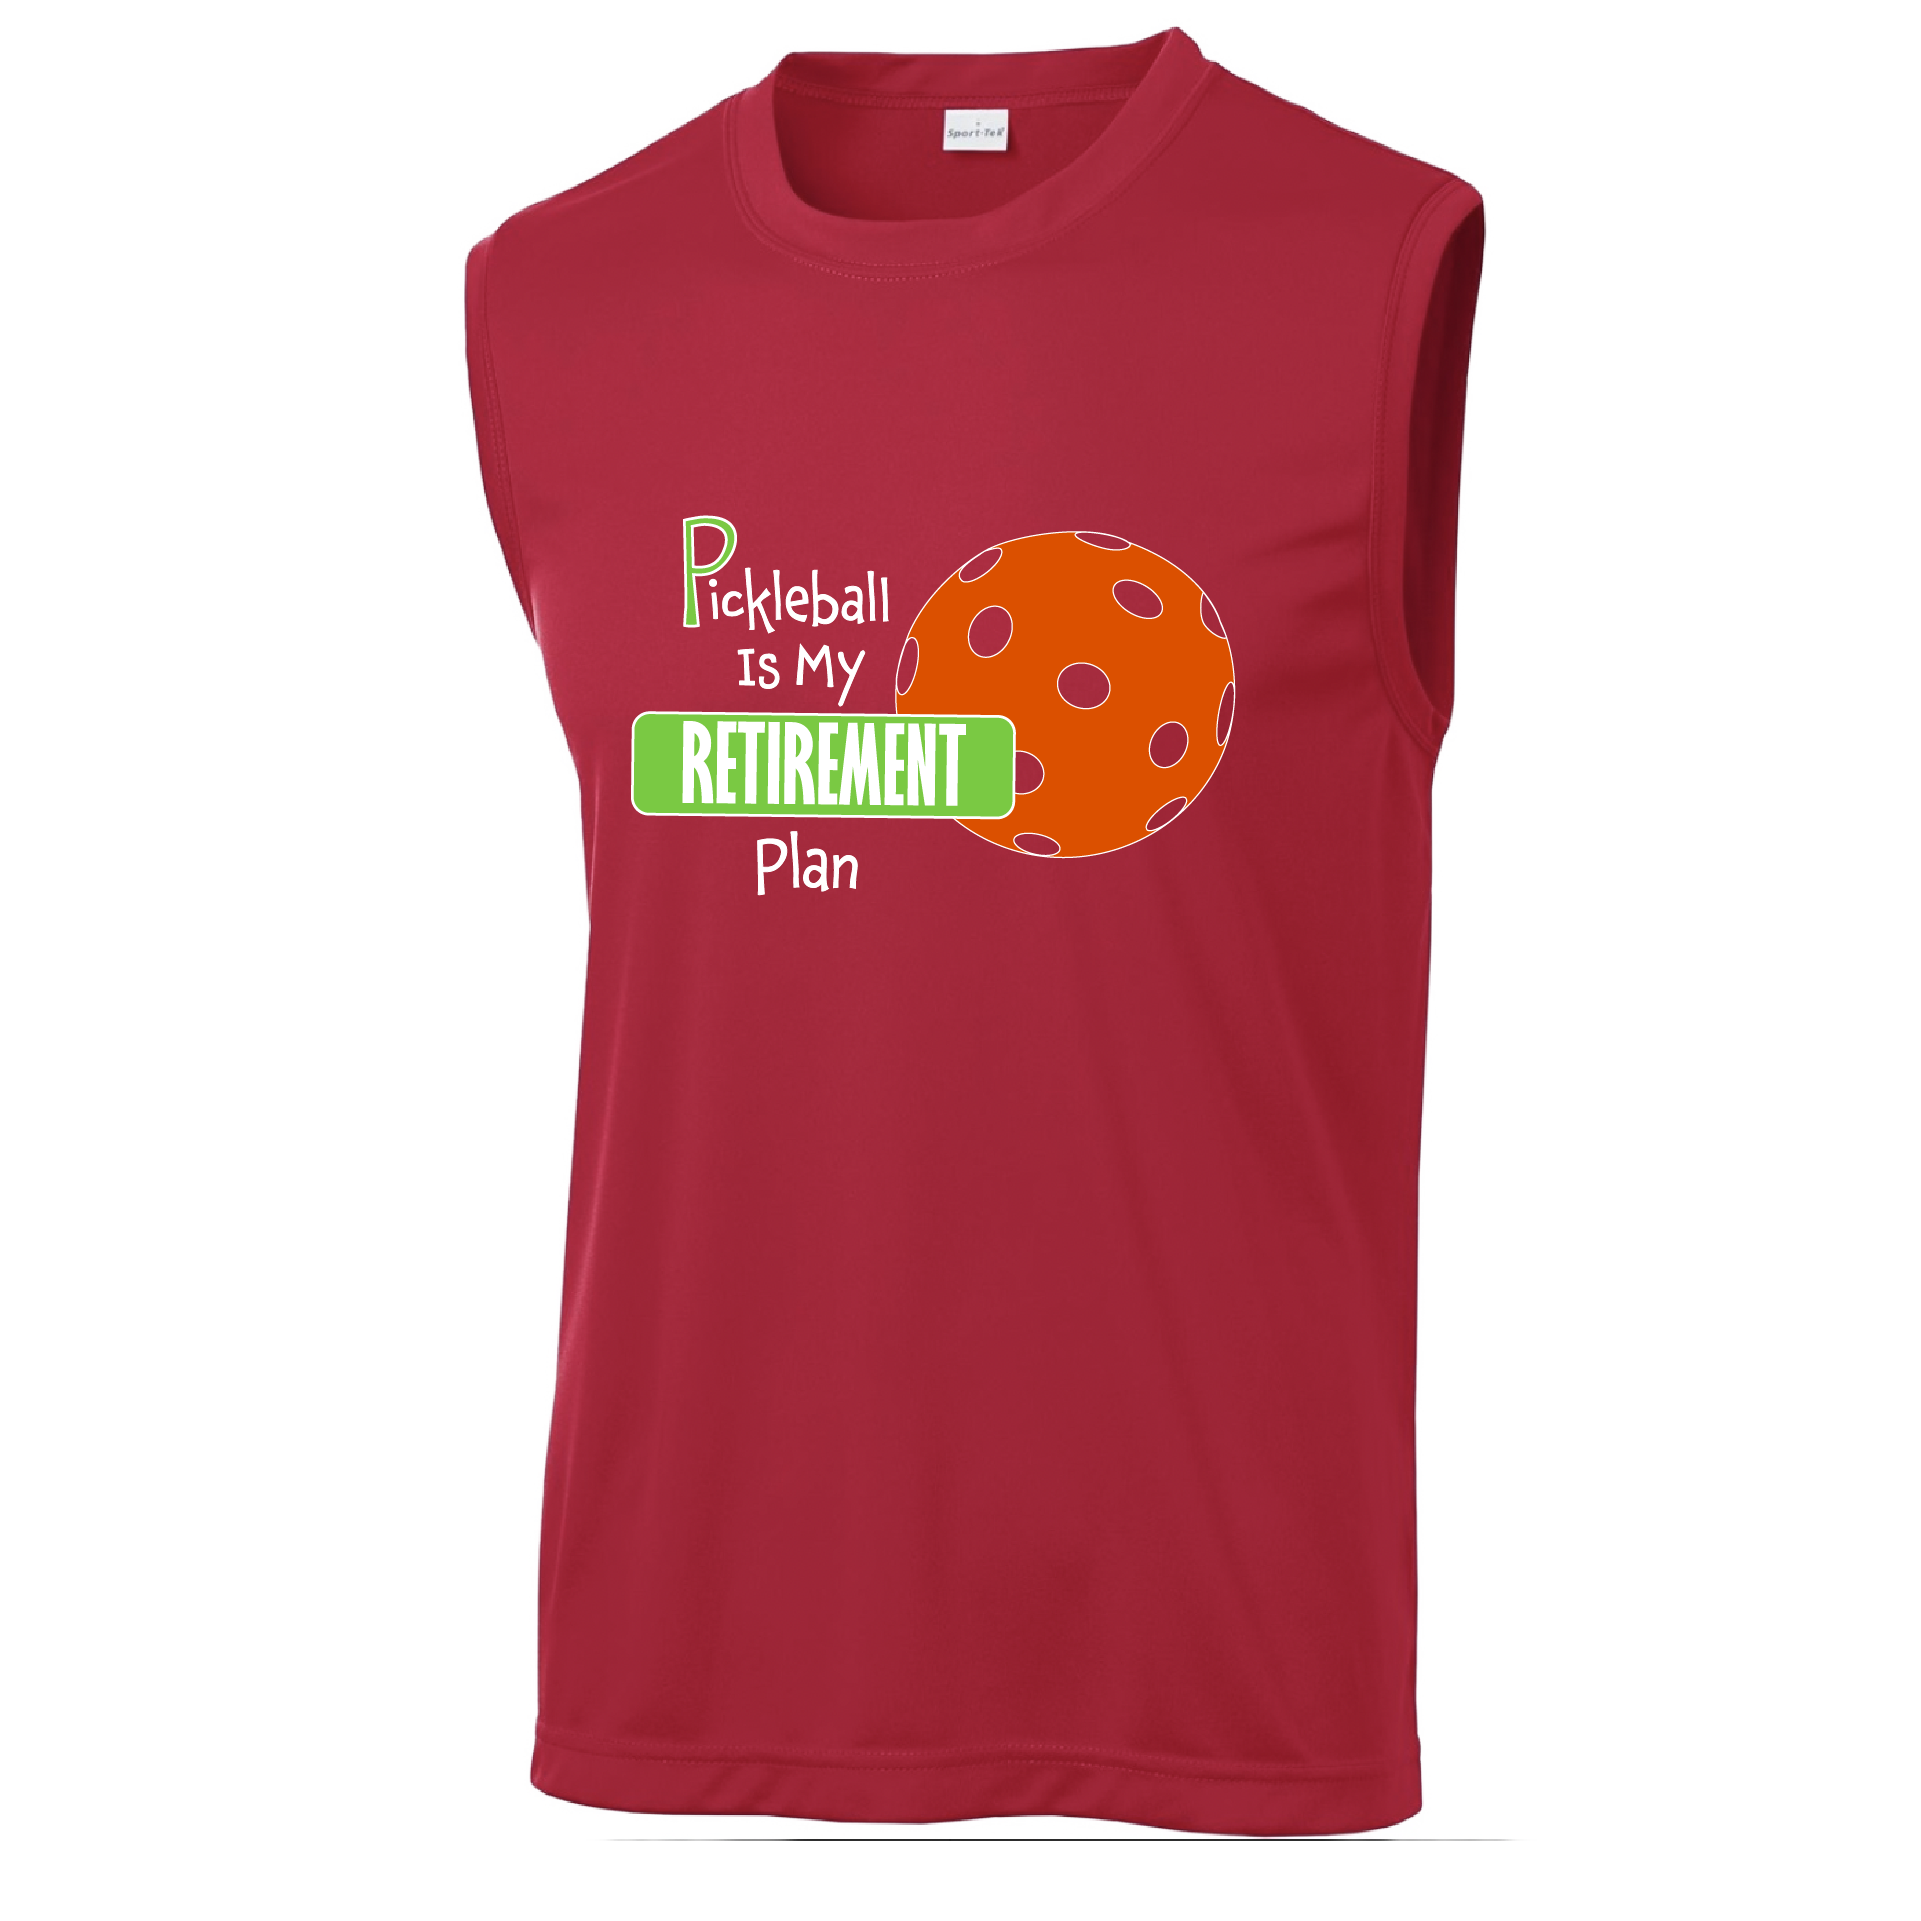 Pickleball Design: Pickleball is my Retirement Plan  Men's Style: Sleeveless  Shirts are lightweight, roomy and highly breathable. These moisture-wicking shirts are designed for athletic performance. They feature PosiCharge technology to lock in color and prevent logos from fading. Removable tag and set-in sleeves for comfort.